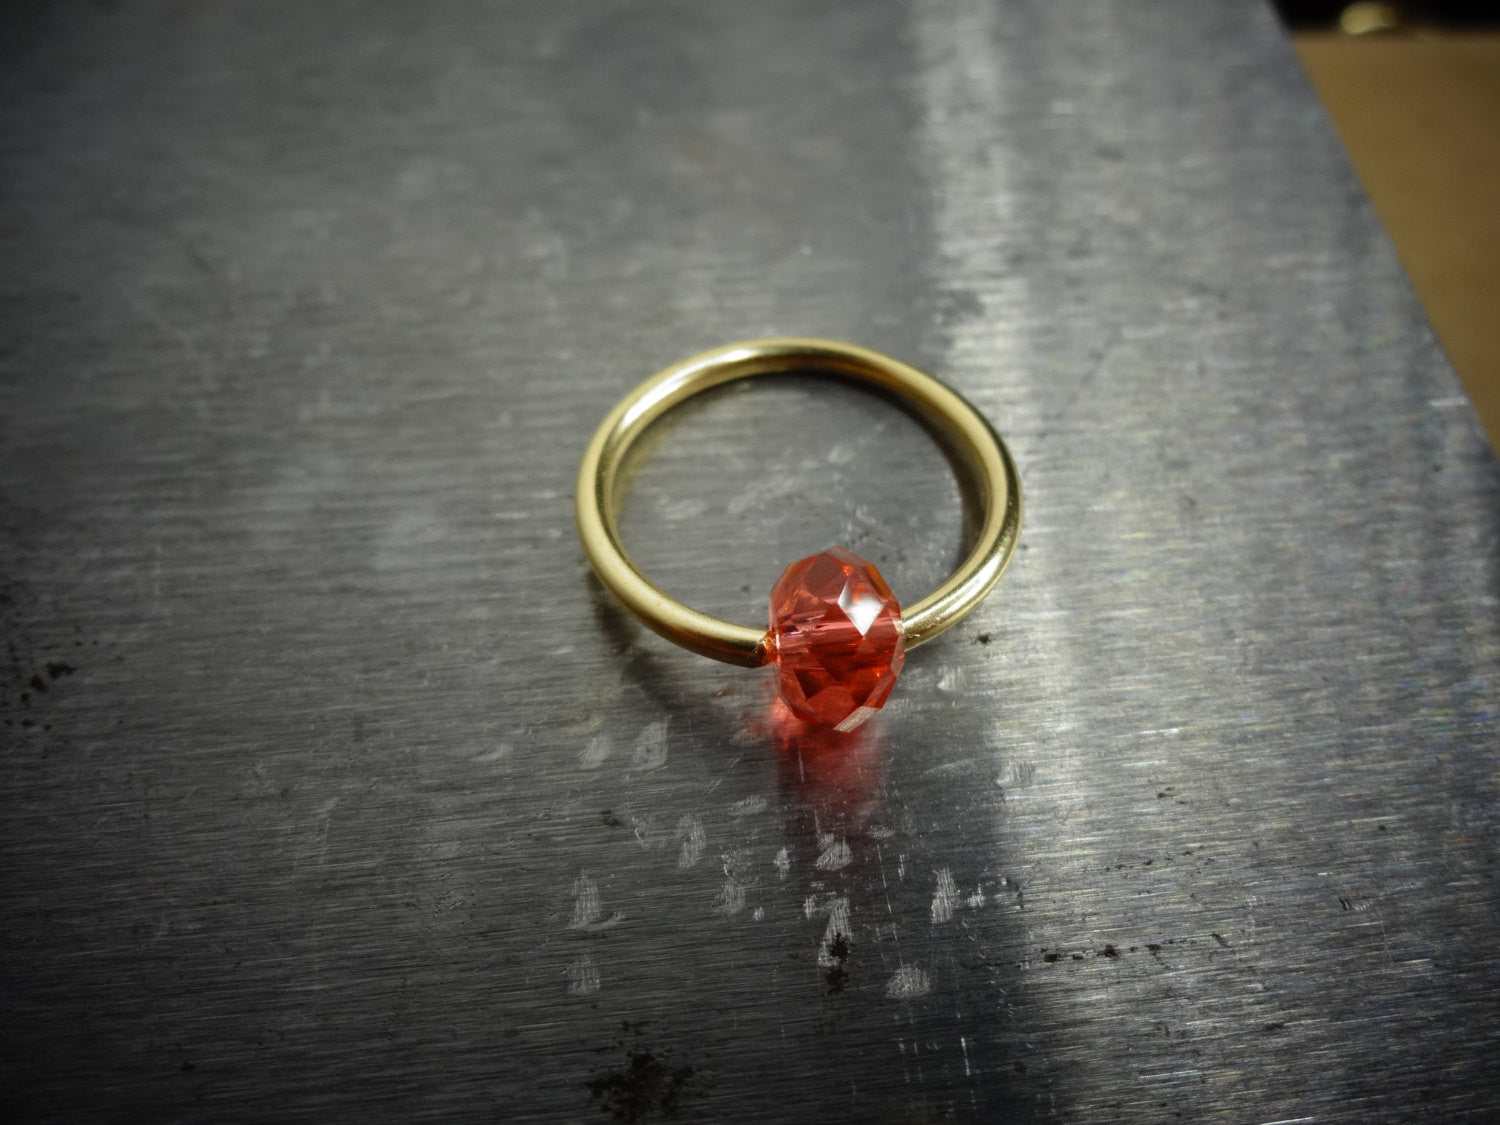 Captive Bead Ring made with PINK PEACH Swarovski Crystal - 16 ga Hoop - 14k Gold (Y, W, or R), Sterling Silver, or Platinumr